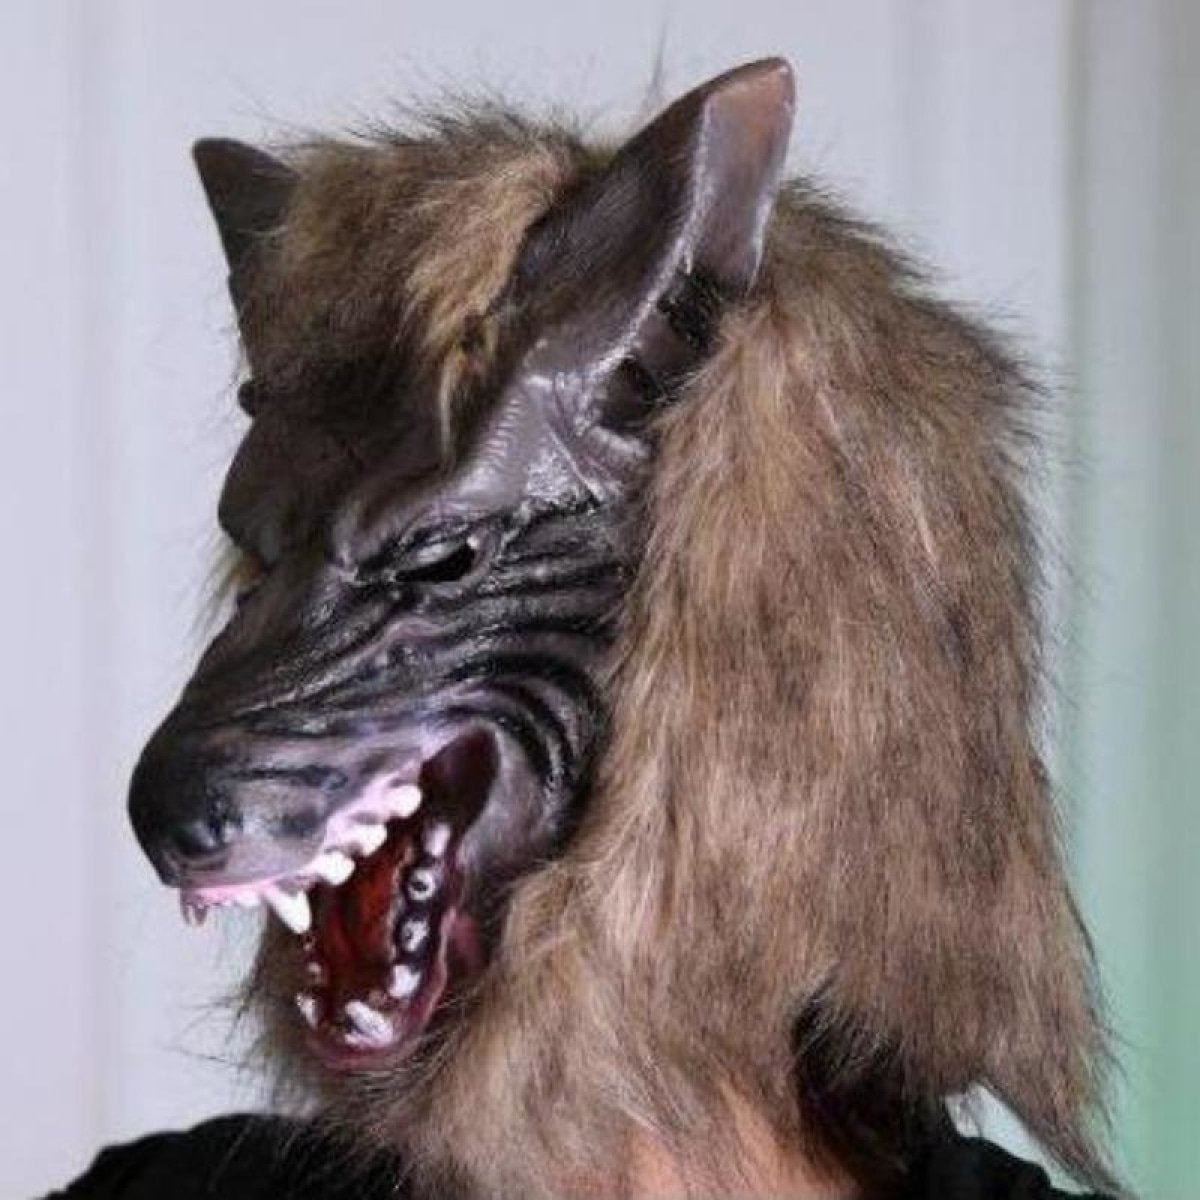 Props Party Dress Up Horror Brown Wolf Scary Mask Animal Toy Horror Dog - Asia Sell.JPG